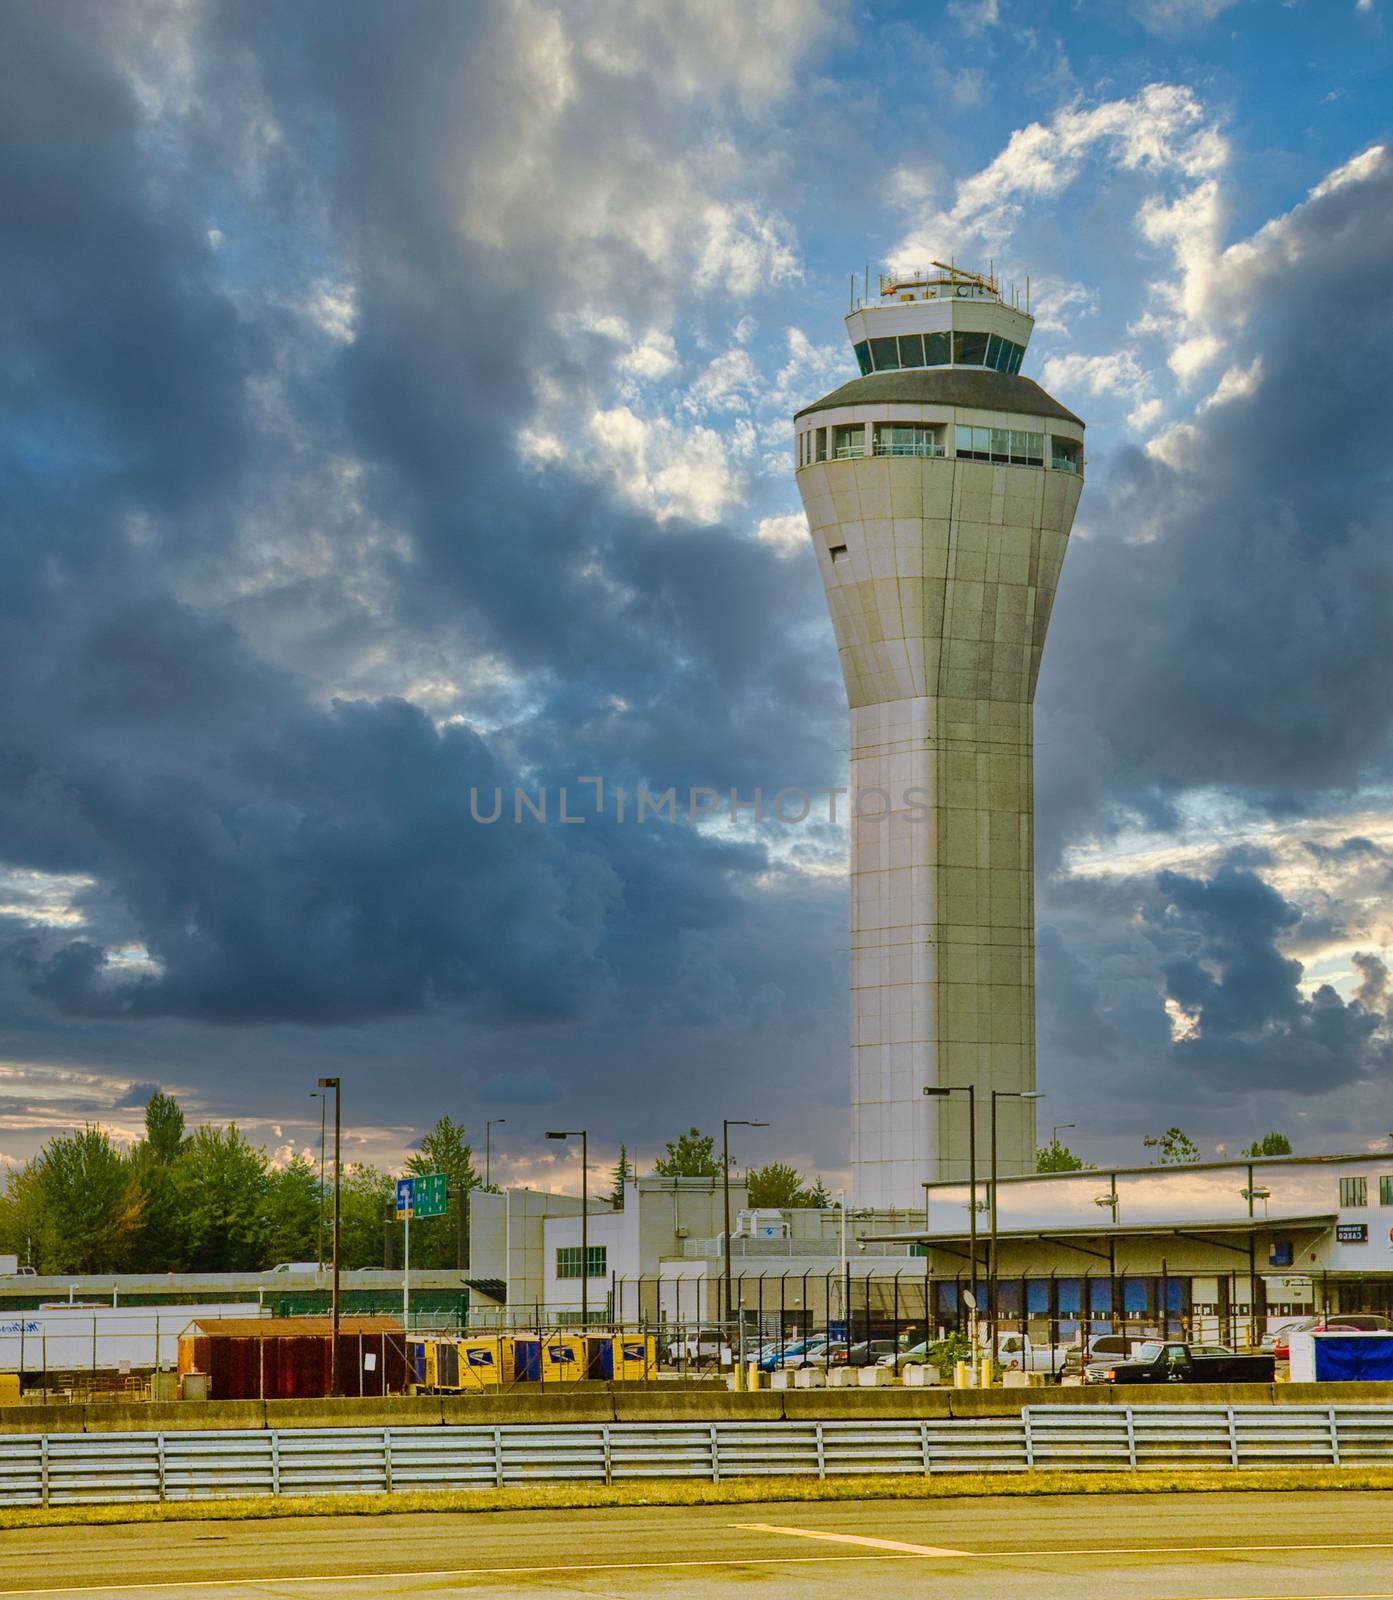 Control Tower at Stormy Airport by dbvirago